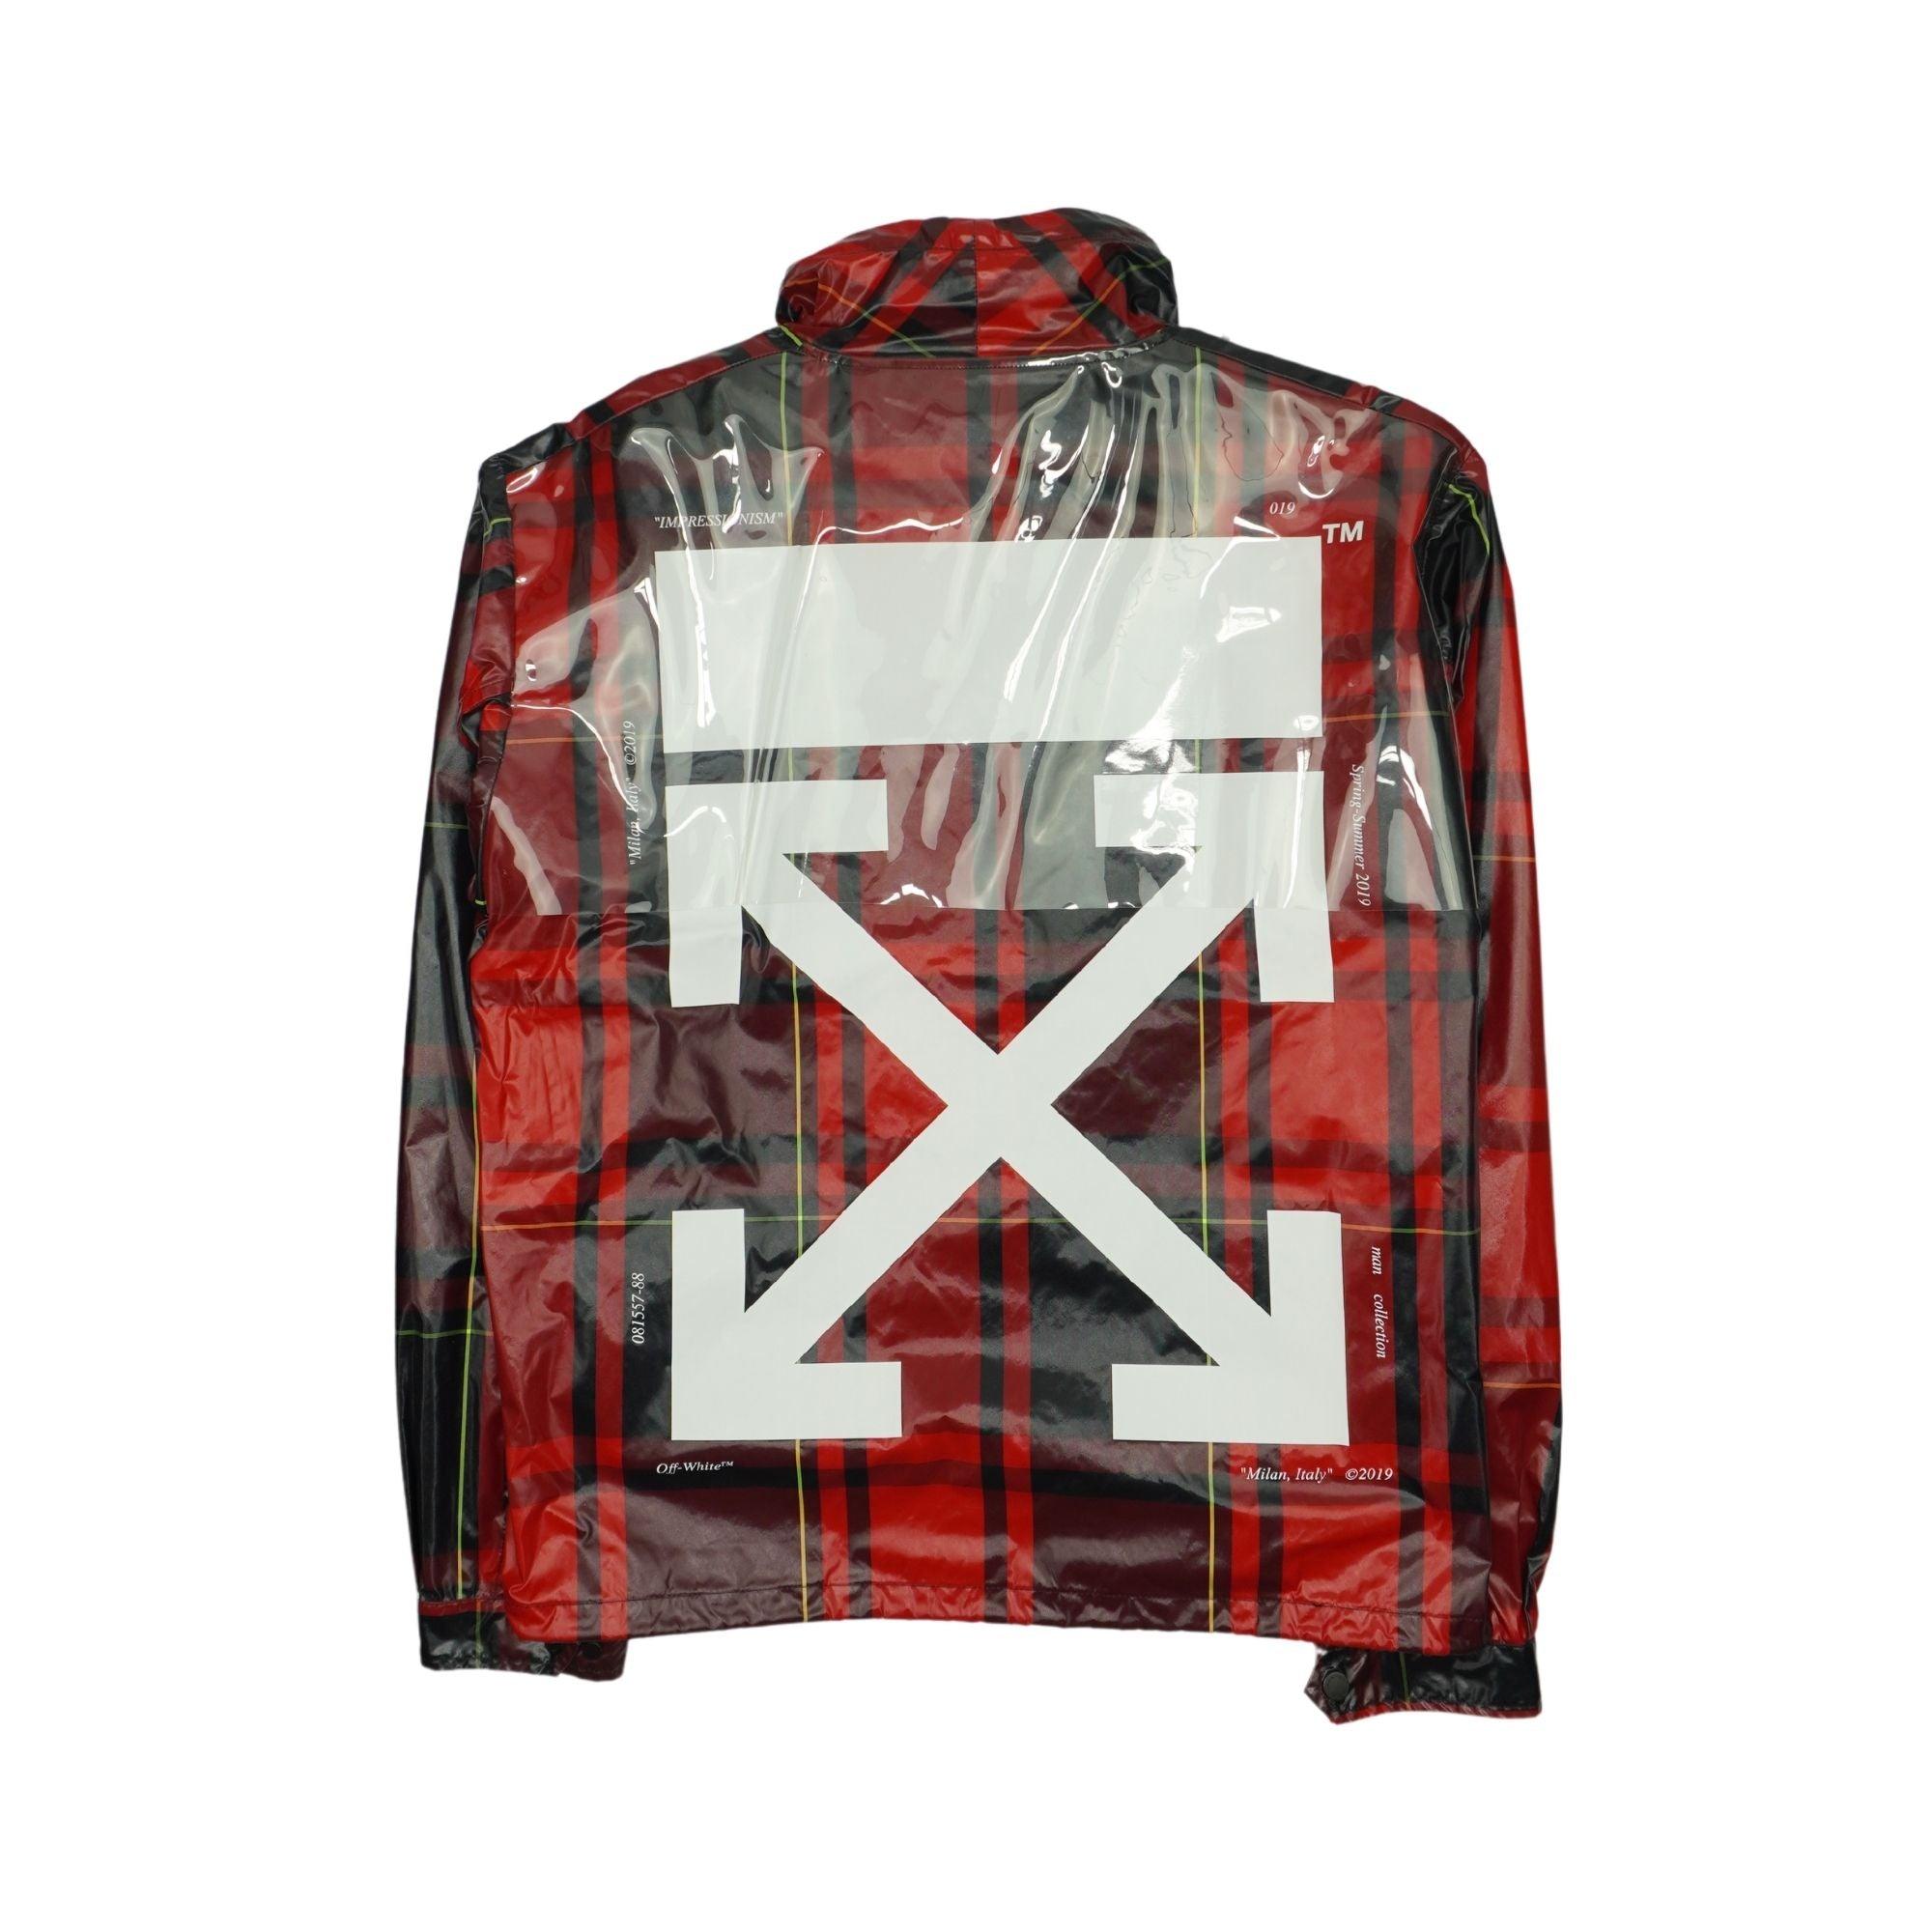 Off-White Jacket - Men's XL - Fashionably Yours